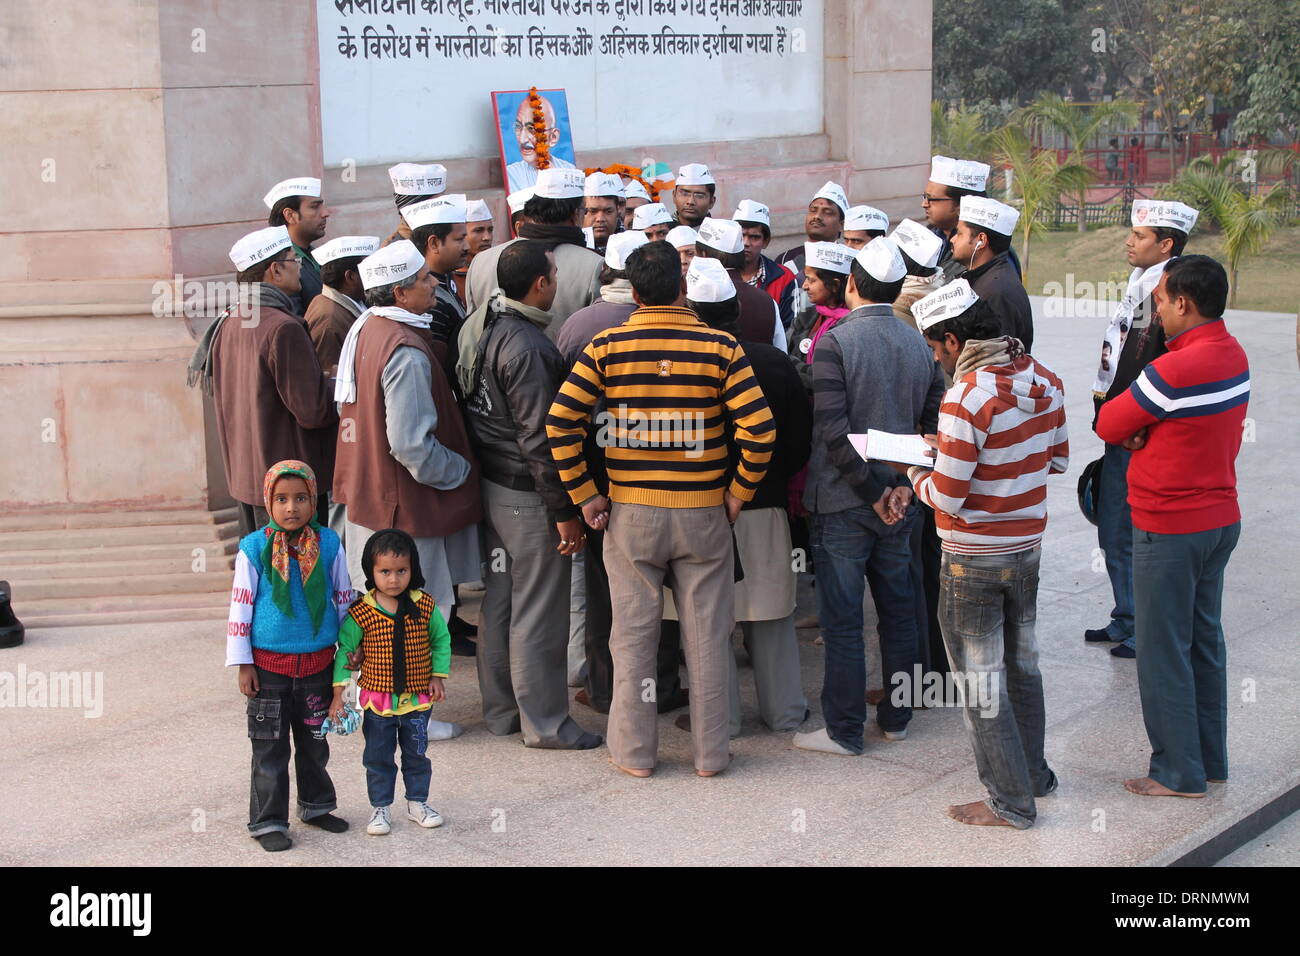 Gandhi Maidan, Patna, Bihar, India, 30th January 2014. Aaam Admi Party workers celebrate Martyrs' Day also known as Sarvodaya day on Thursday afternoon at Gandhi Statue on 67th death anniversary of Mahatma Gandhi on January 30, 2014. After the victory of Aam Admi Party (AAP) led by Arvind Kejriwal, there is a sudden increase in the party membership all over Bihar as Aam Aadmi Party promise to bring an end to corruption and begin real development that appeal to common people. Various such programs are performed all over Bihar today to commemorate Gandhi. Credit:  Rupa Ghosh/Alamy Live News. Stock Photo